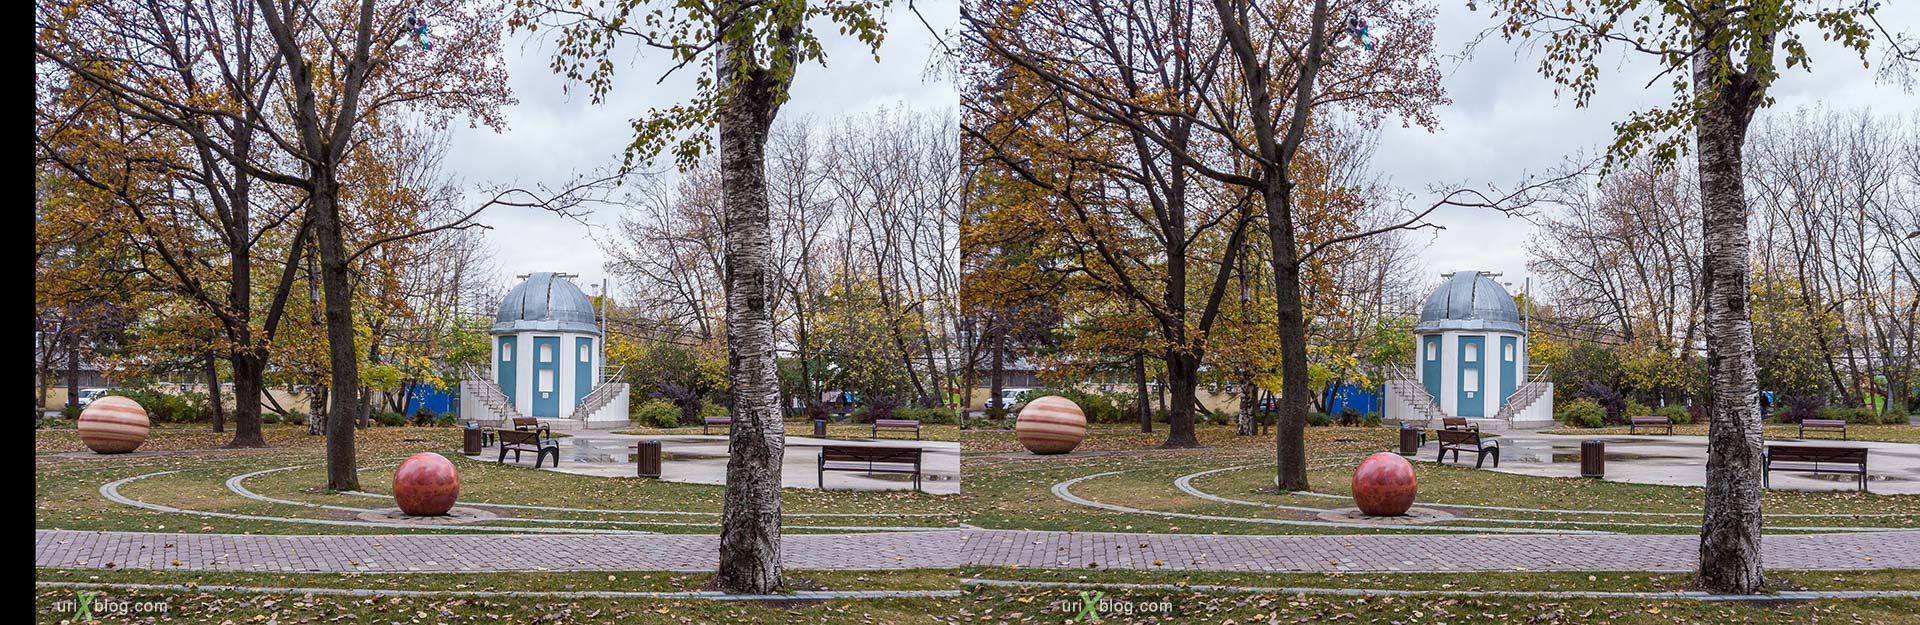 observatory, Sokolniki, park, Moscow, Russia, 3D, stereo pair, cross-eyed, crossview, cross view stereo pair, stereoscopic